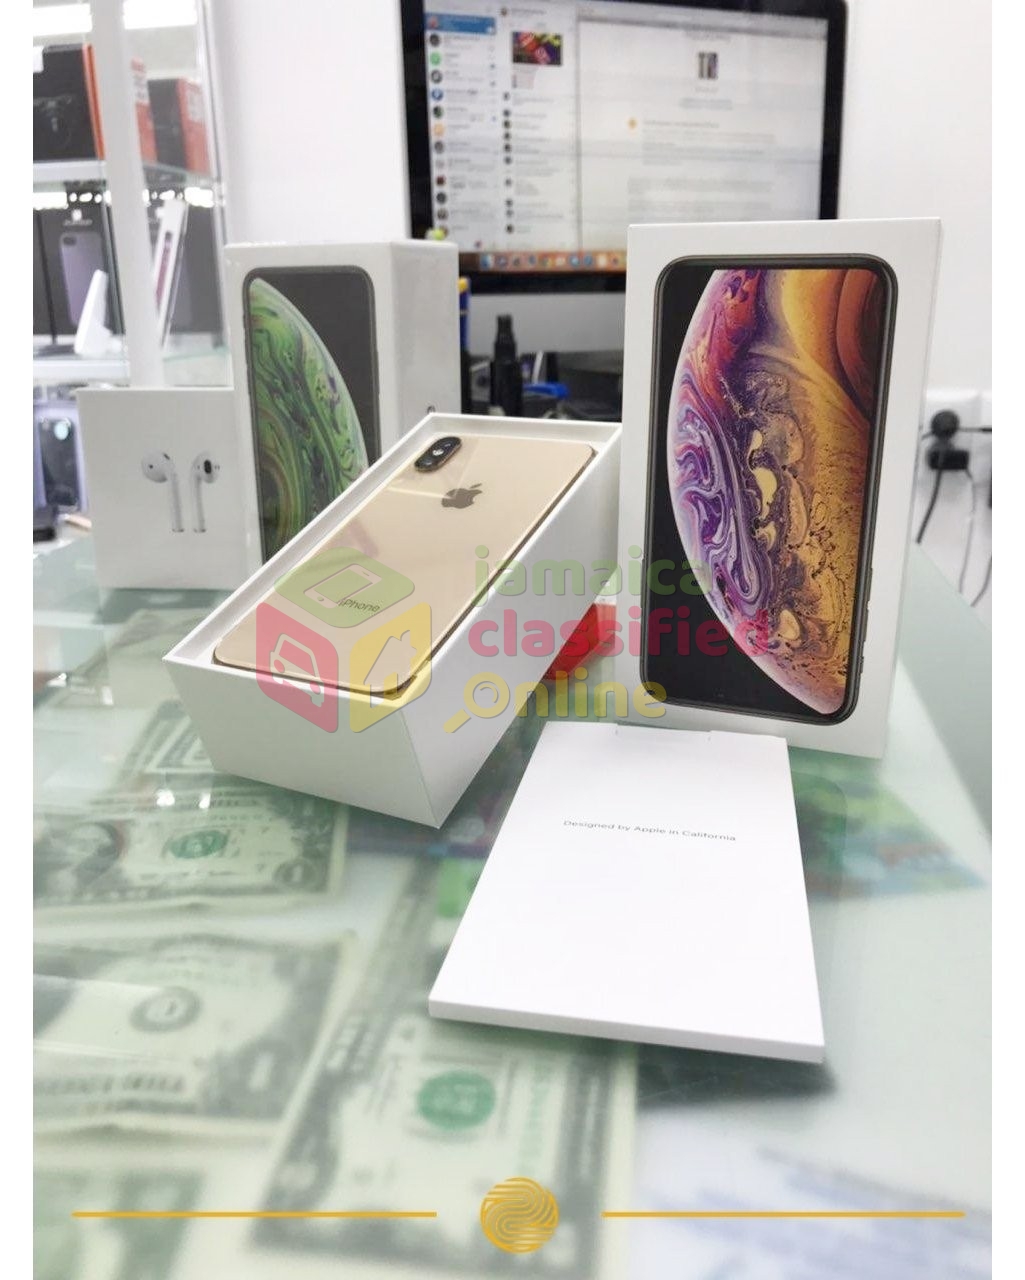 Apple IPhone XS Max - 256GB for sale in Portland St James - Phones